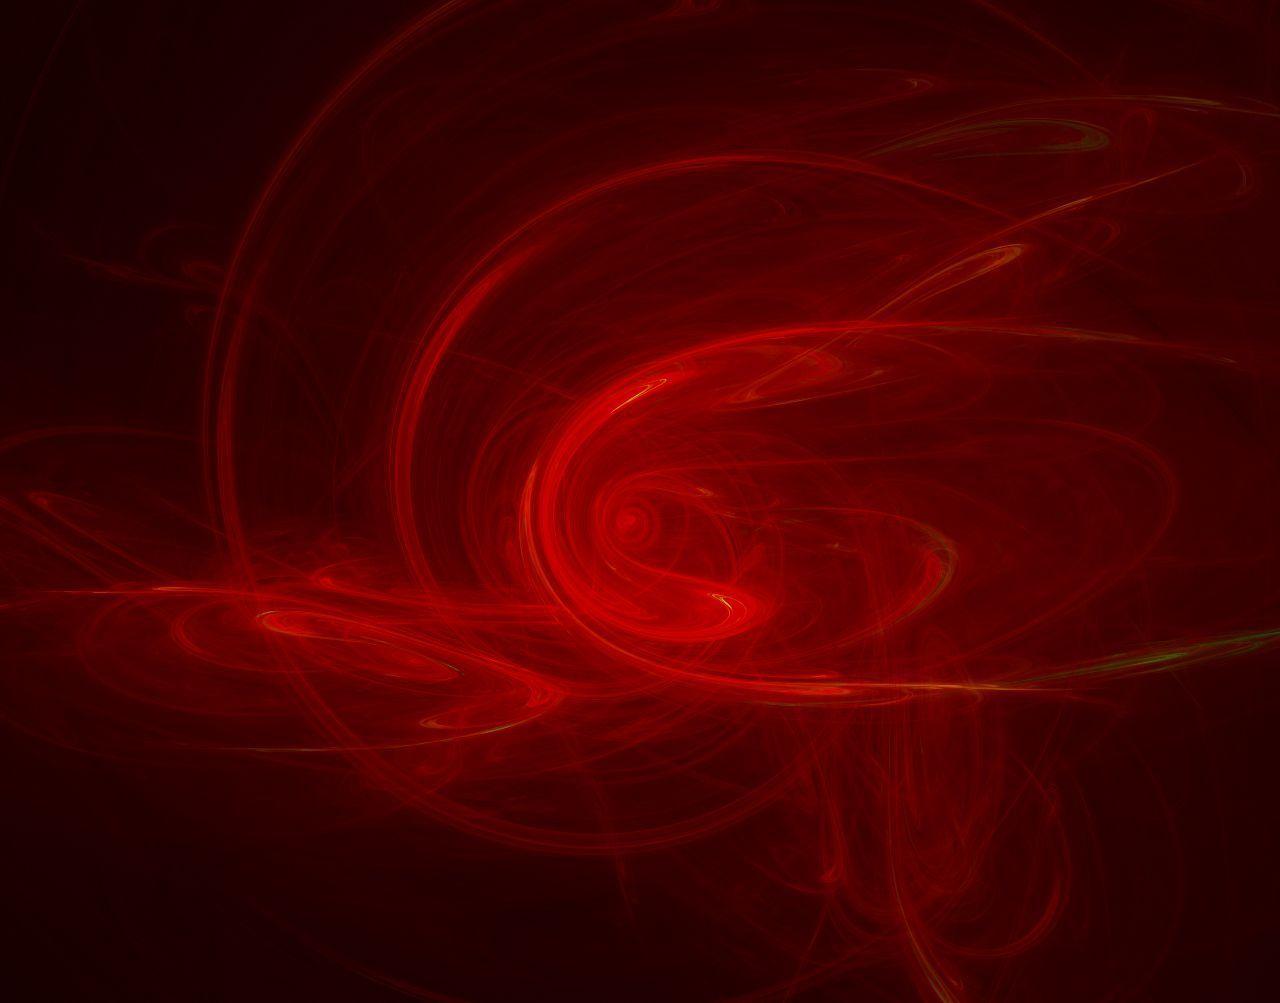 Wallpapers For > Backgrounds Image Black And Red